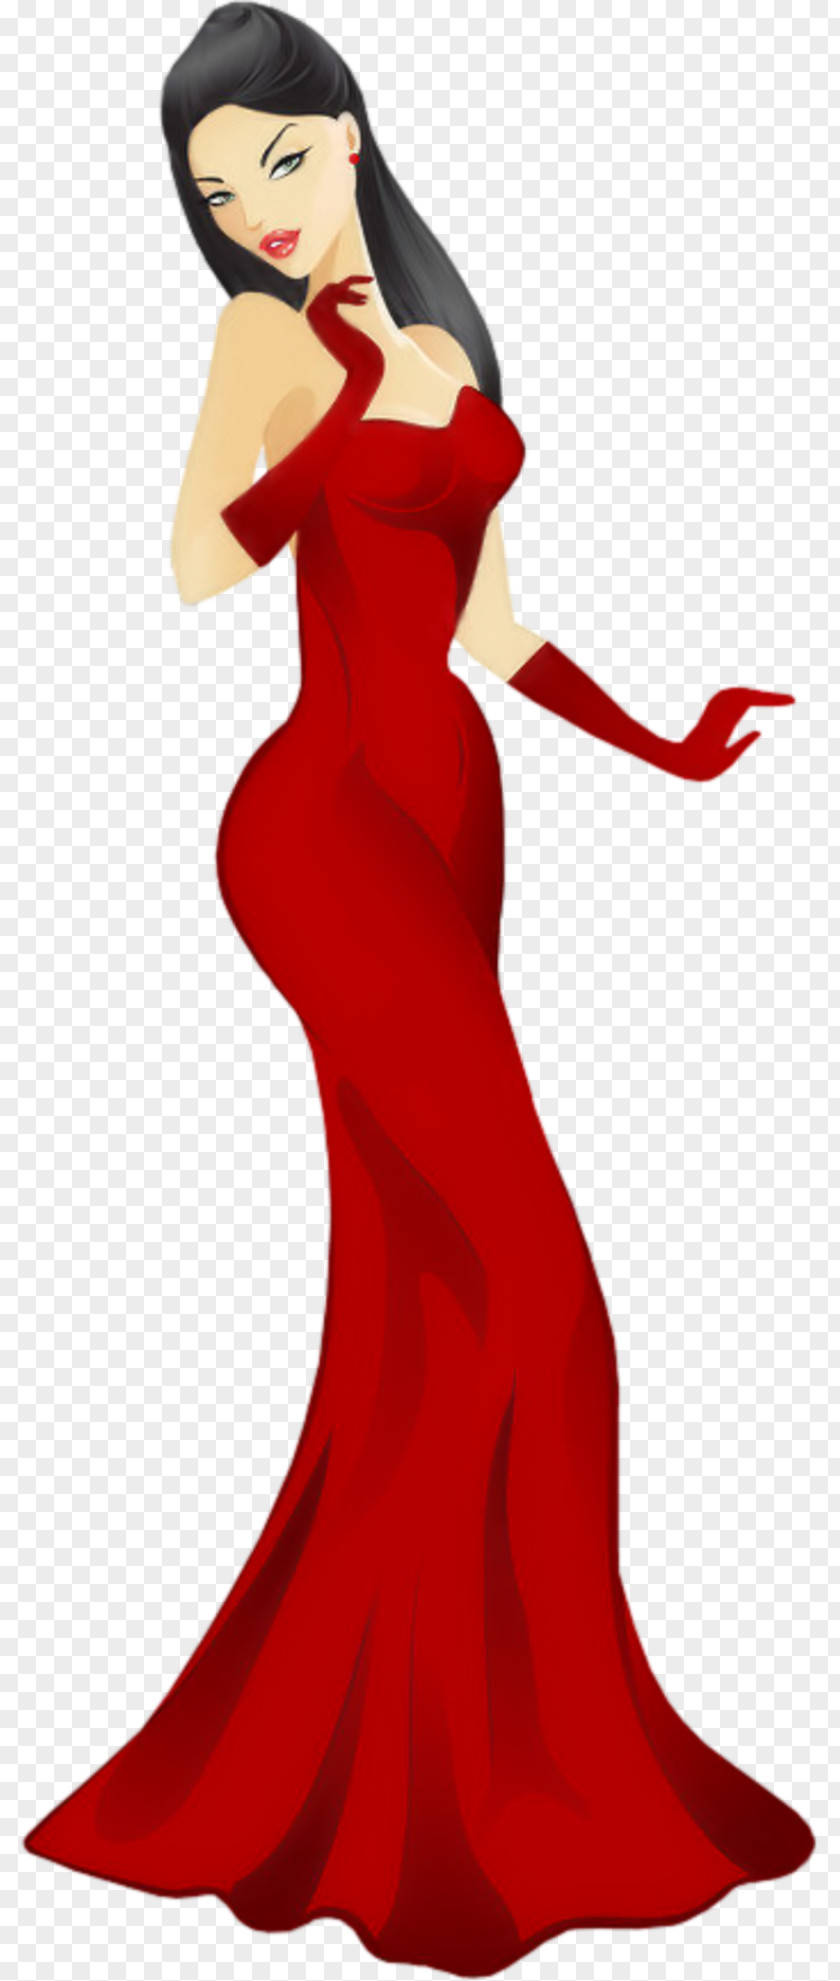 Lady In Gown Sabah Betty Boop Cartoon PNG